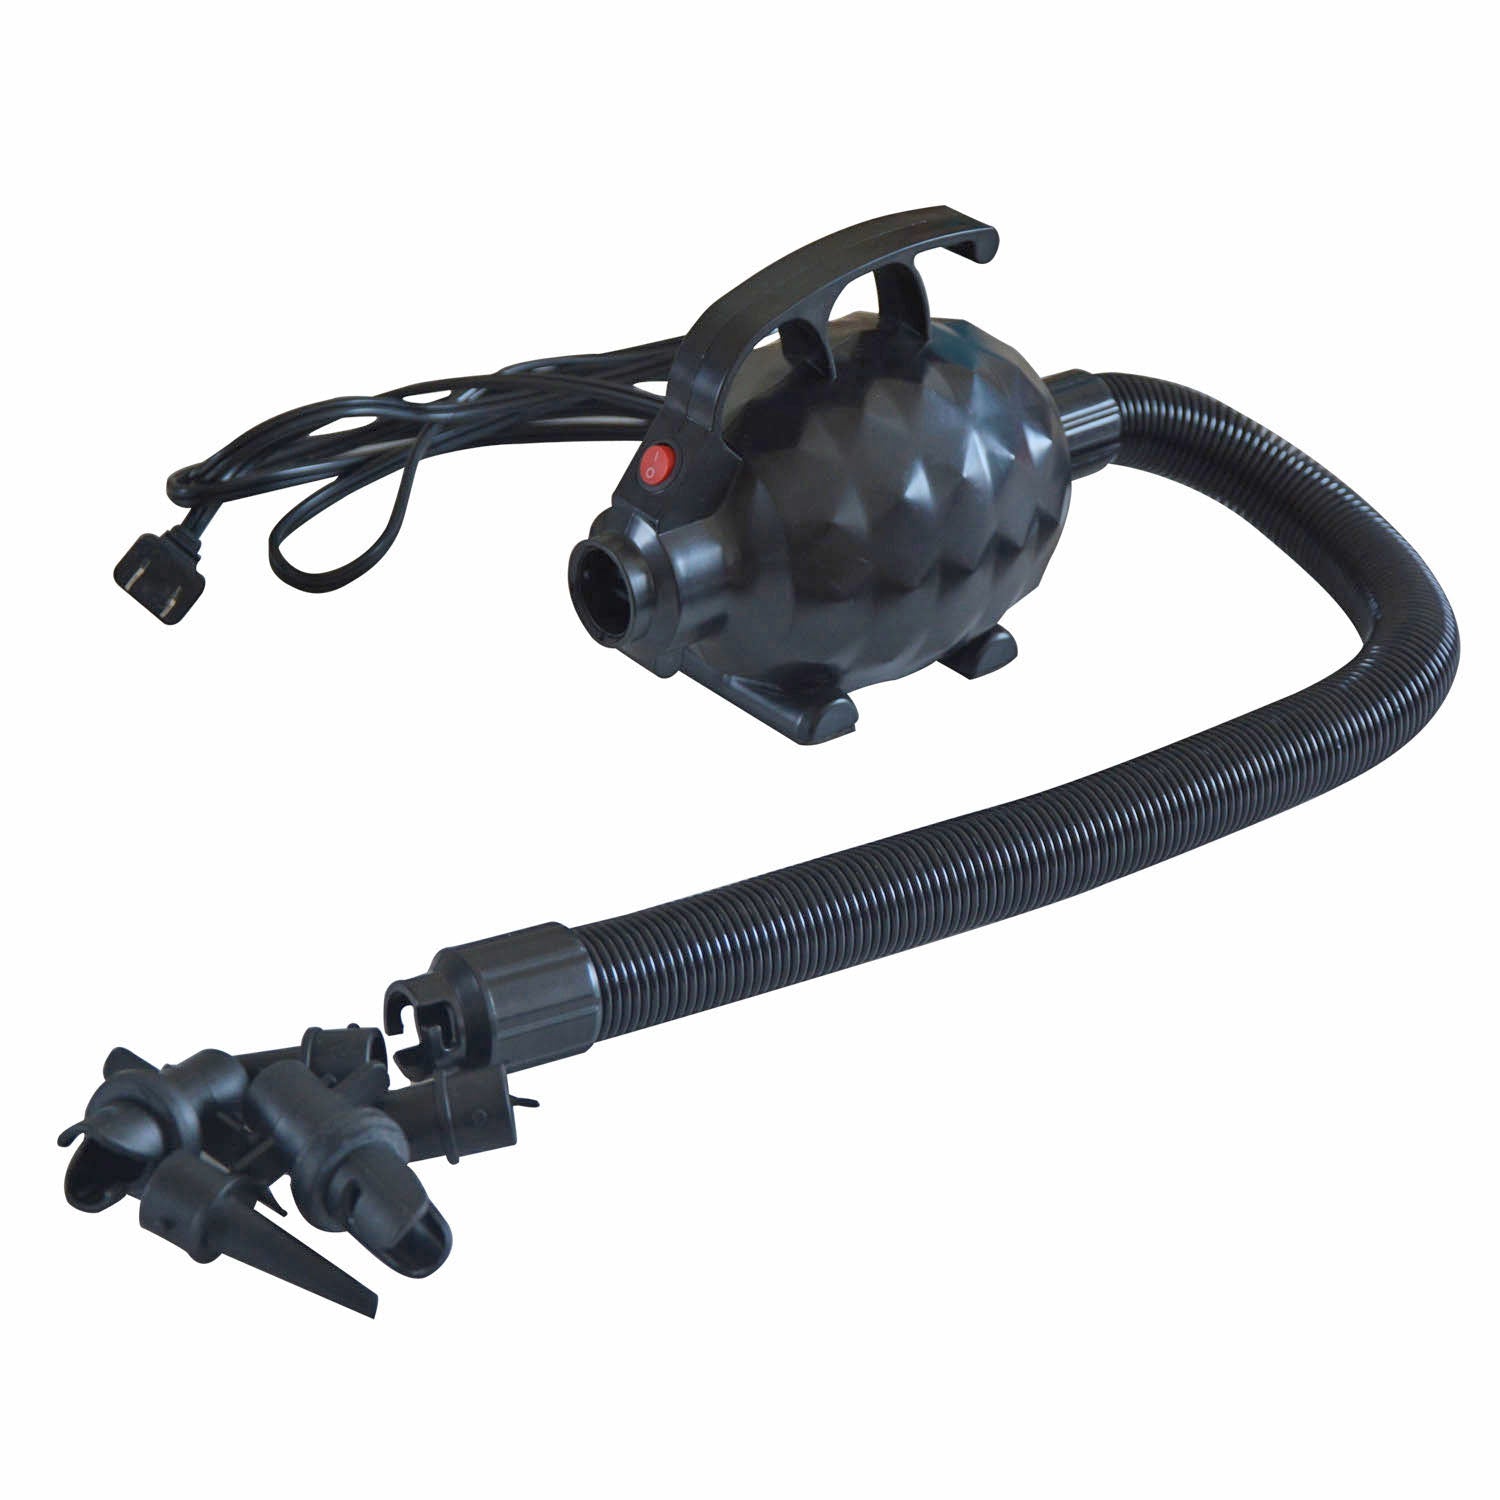 Electric pump for gymnastic air track